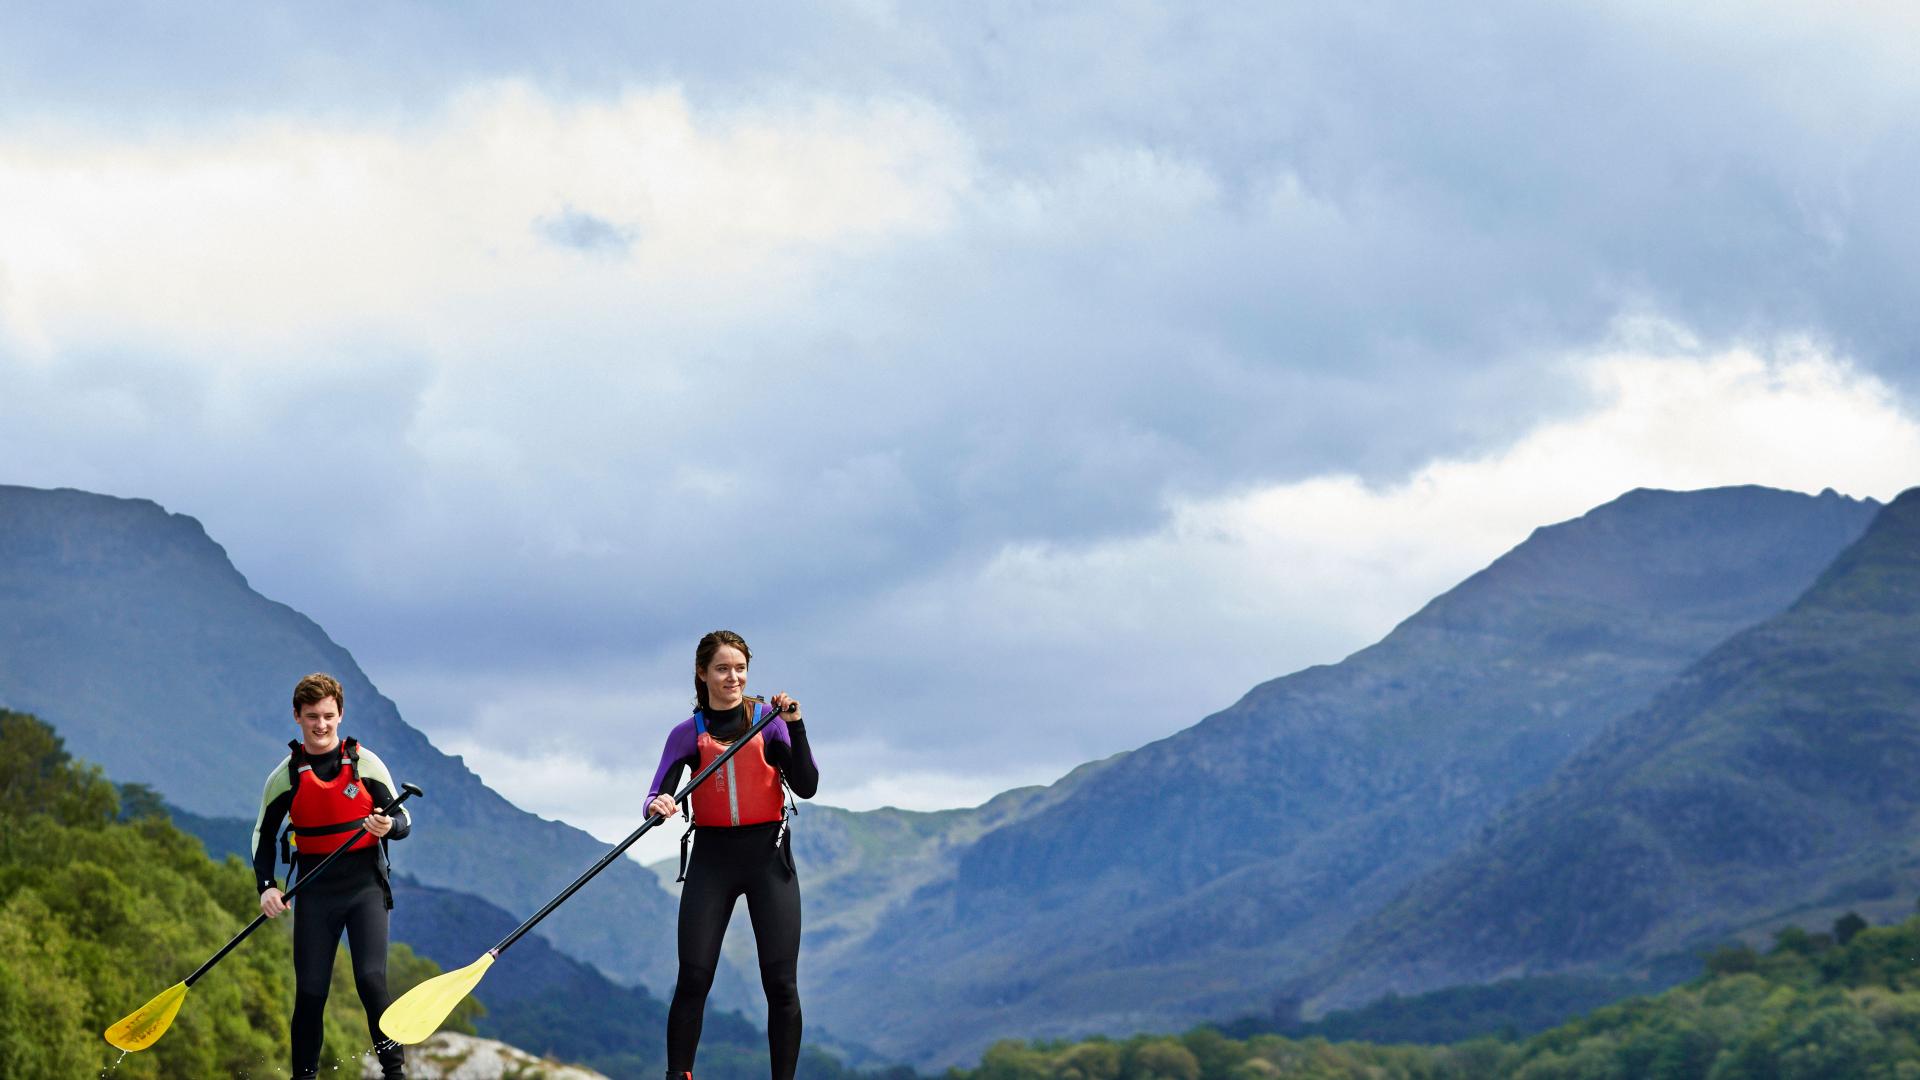 Two students paddle boarding on Llyn Padarn Lake in nearby LLanberis with the Snowdonia mountain range in the background